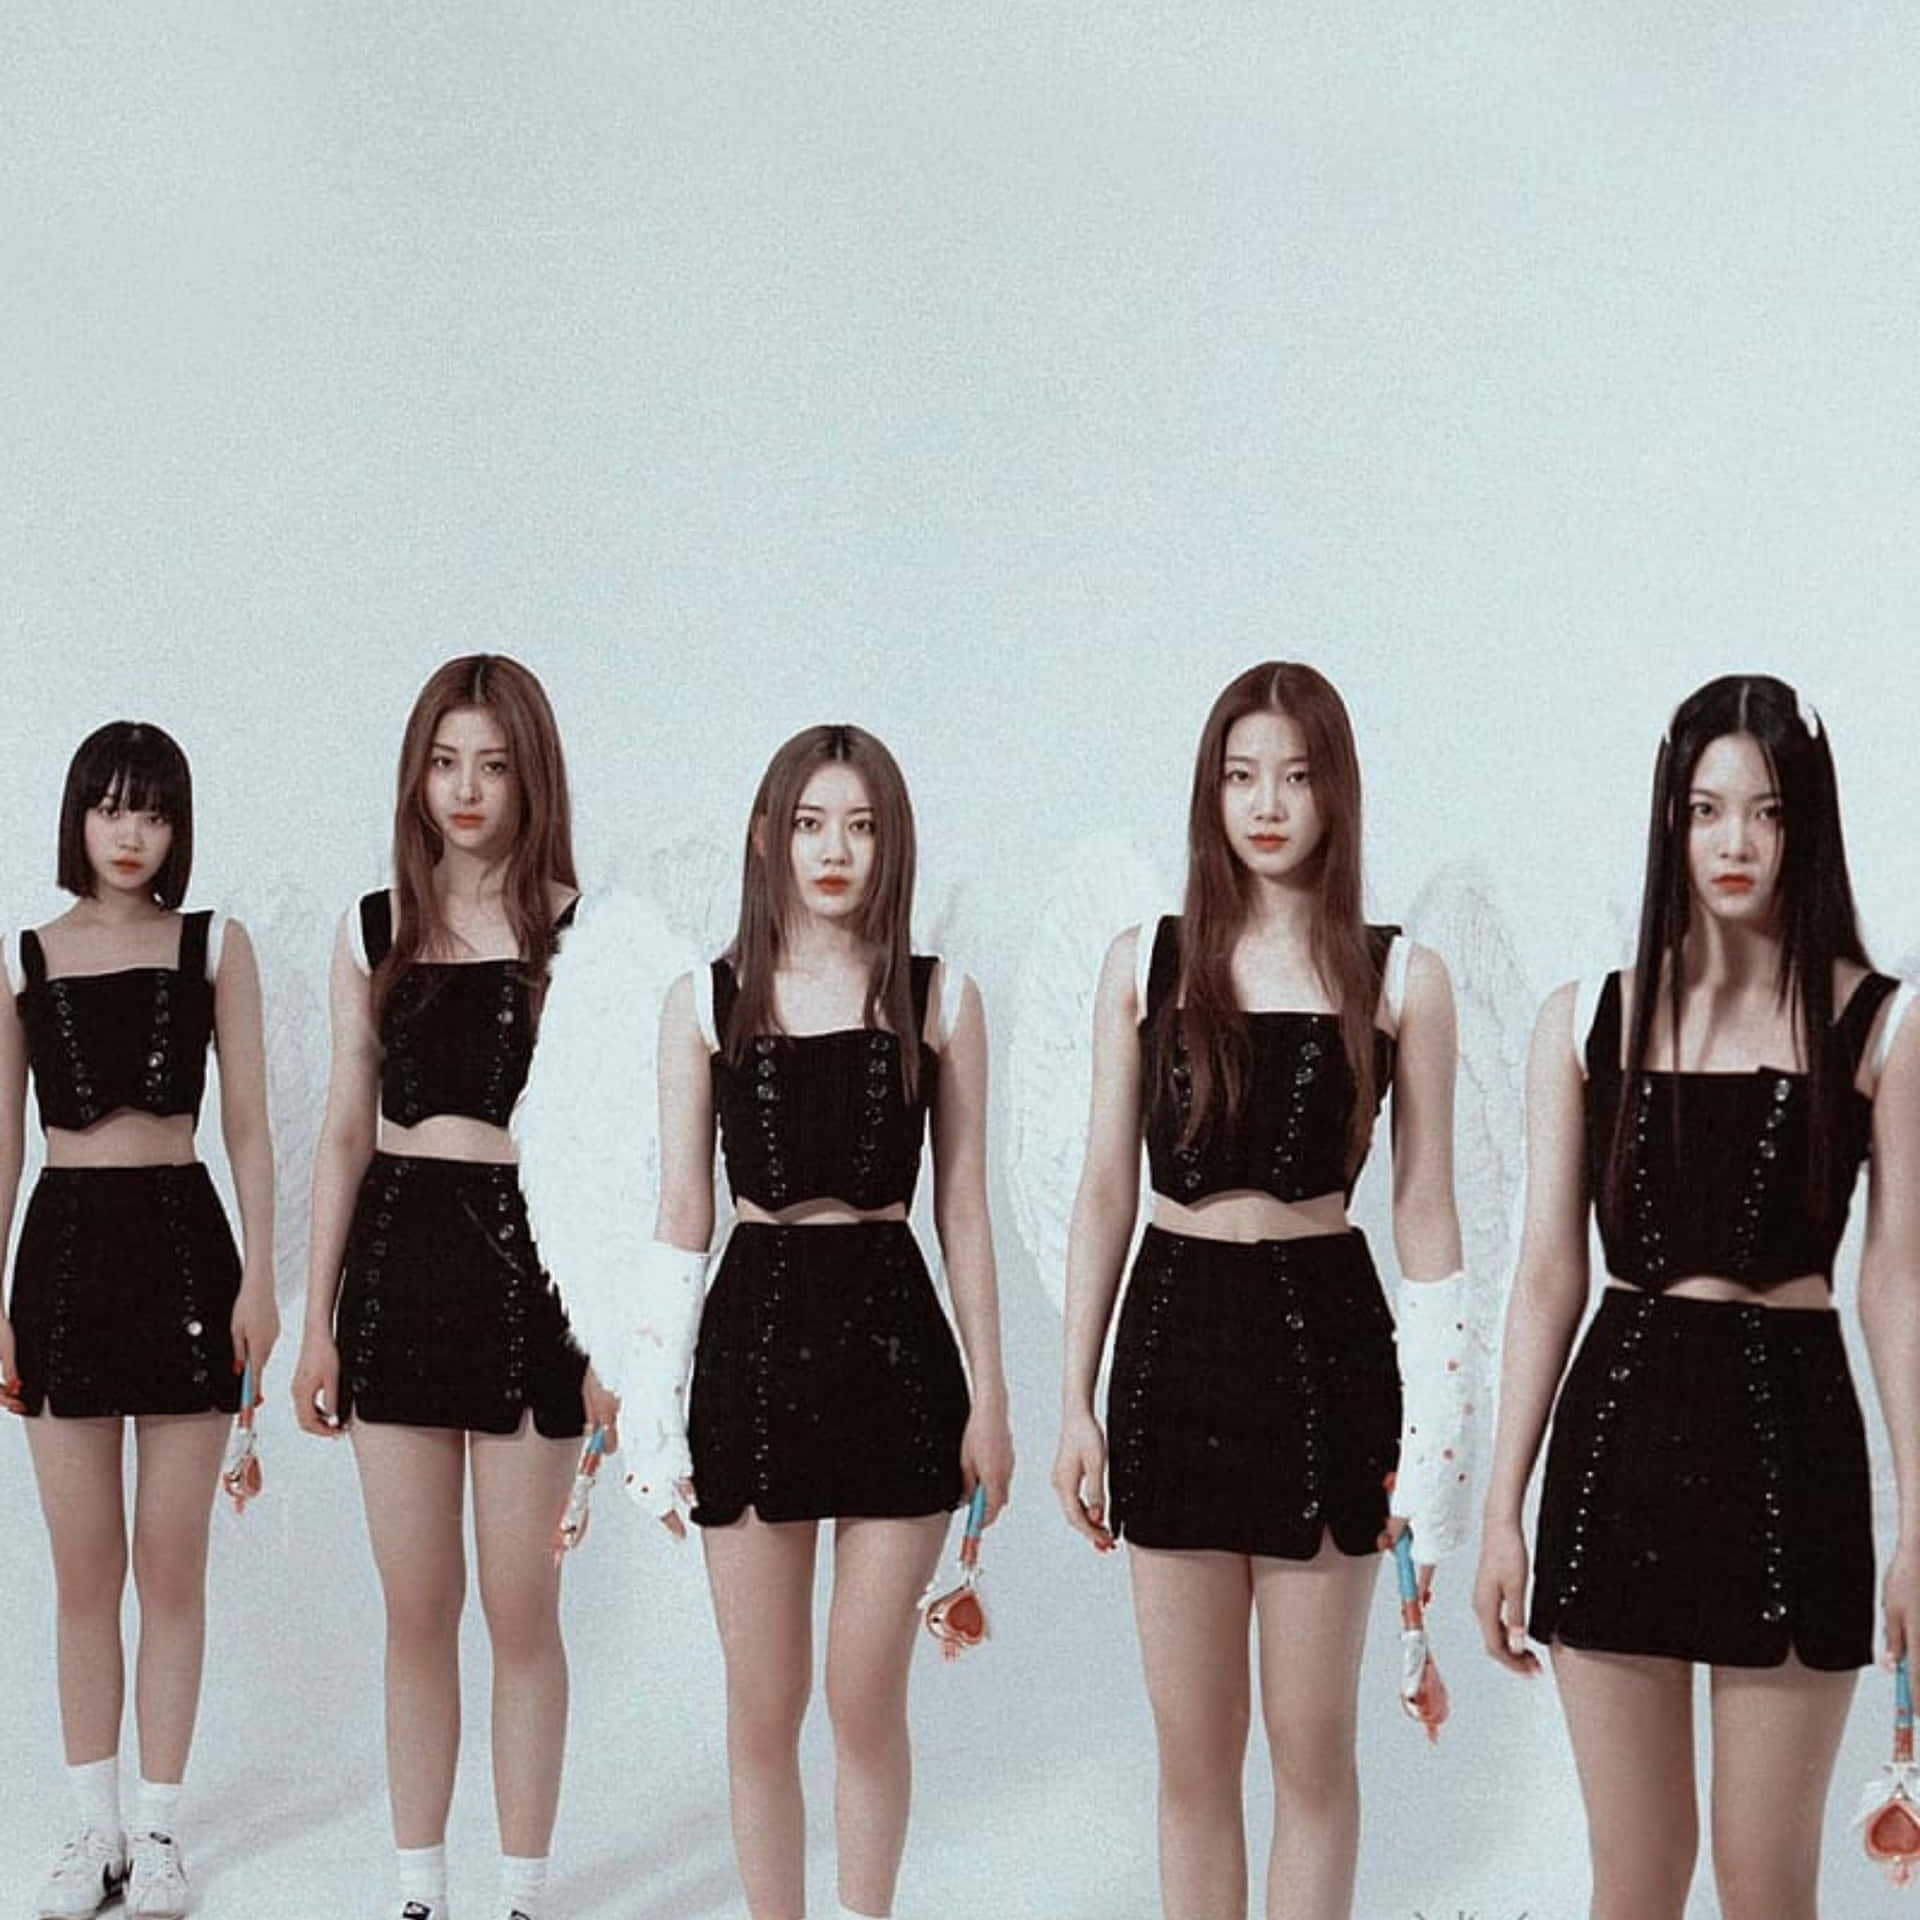 Kpop_ Group_ In_ Black_ Outfits Wallpaper